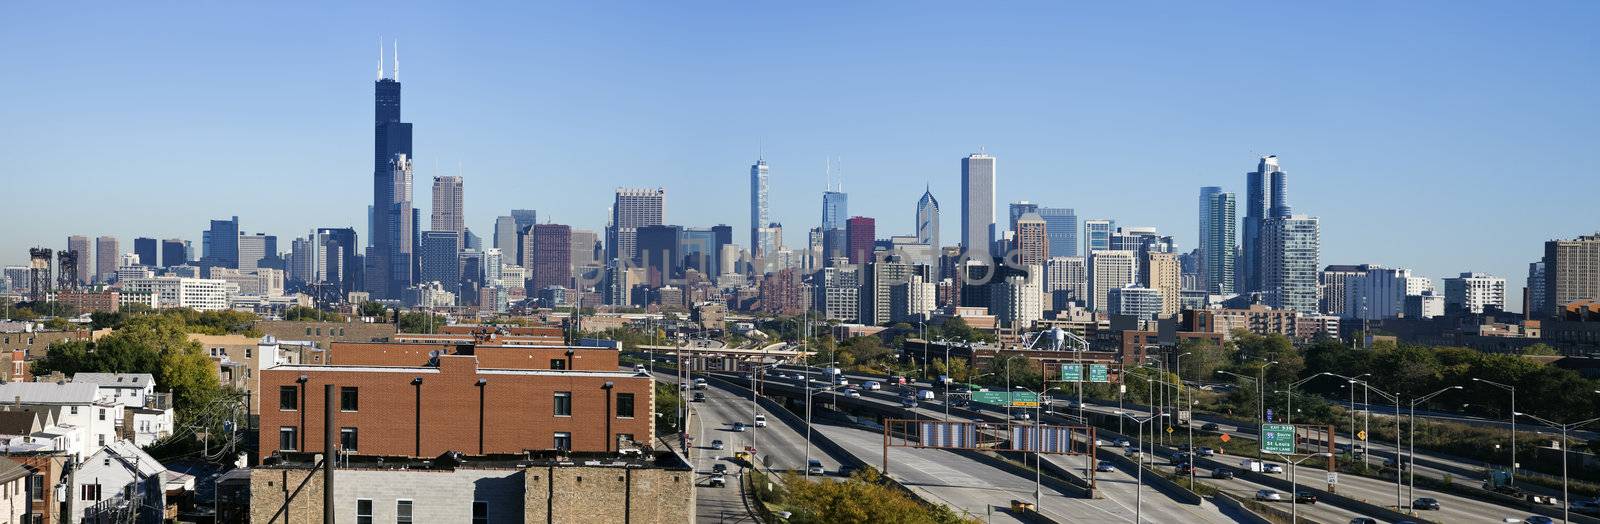 Panoramic view of downtown Chicago from the south side